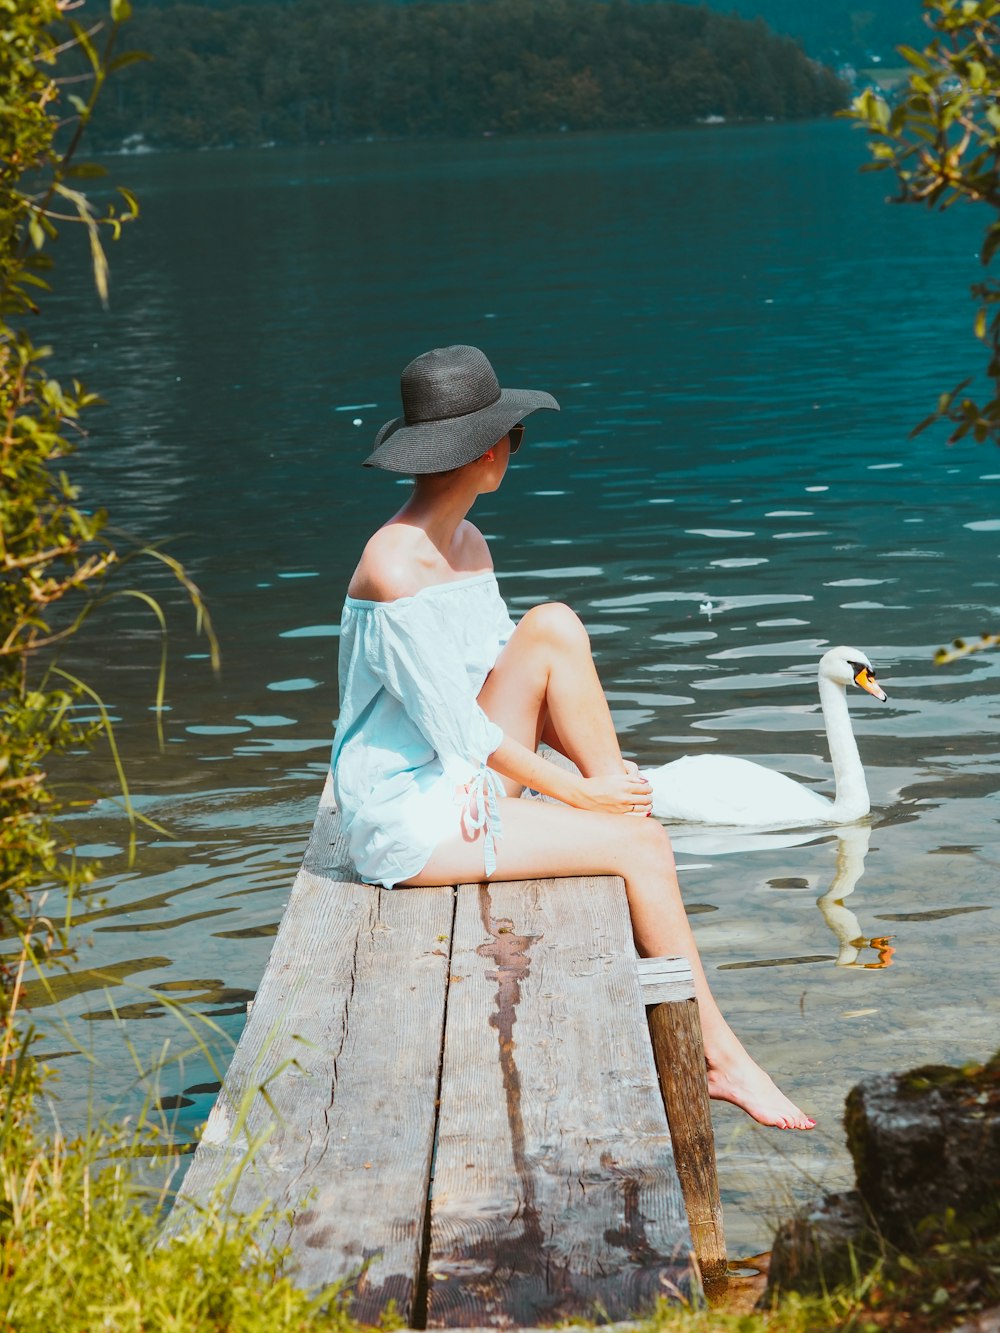 woman in white dress sitting on brown wooden dock during daytime